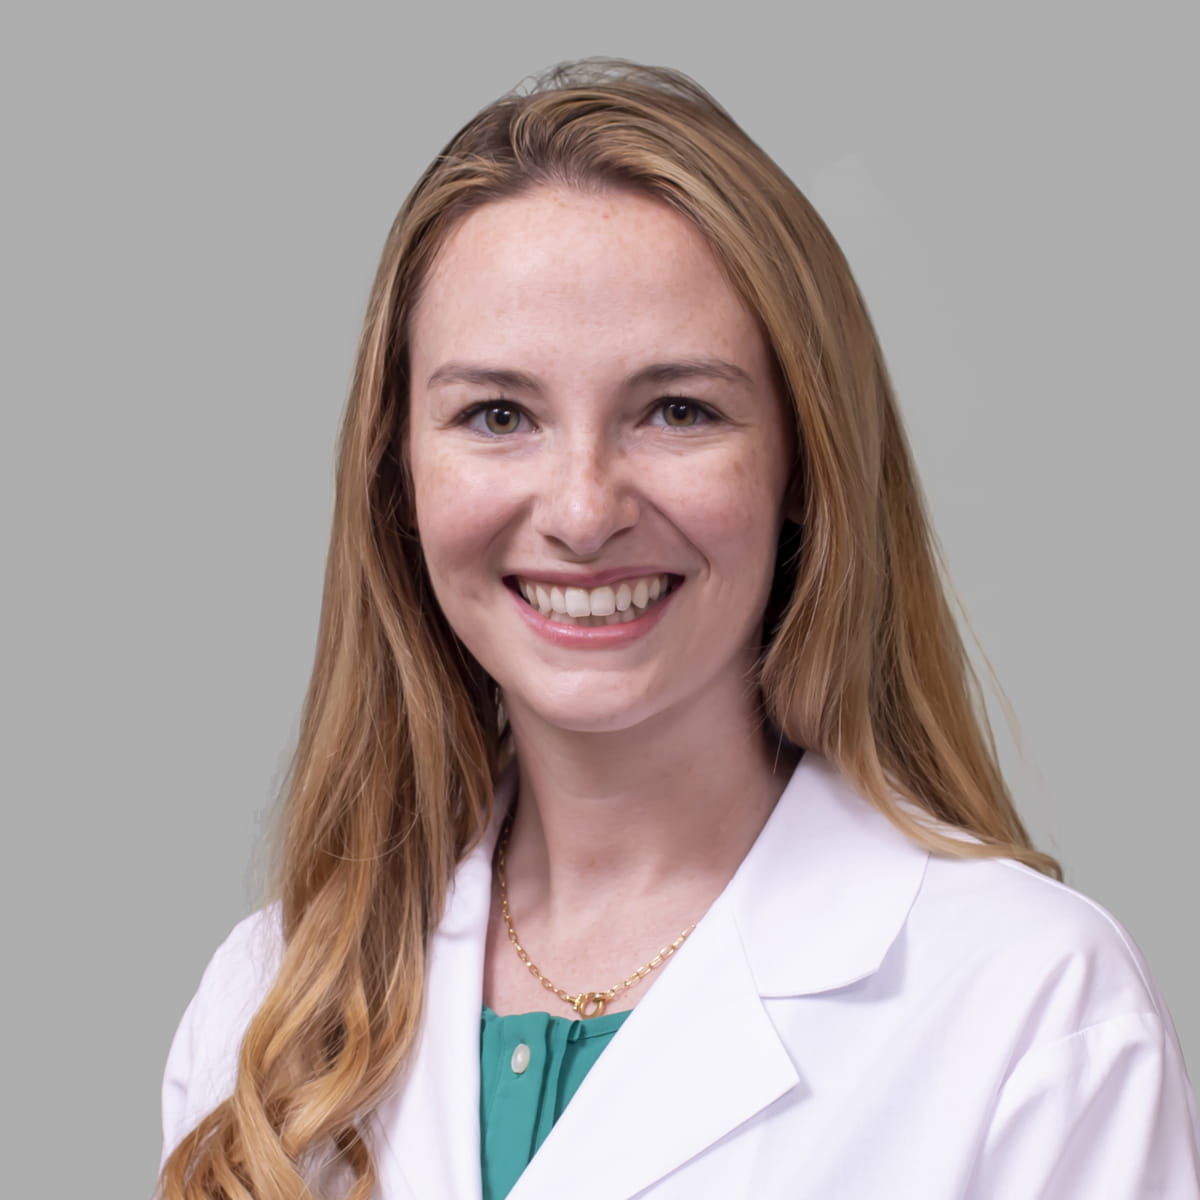 A friendly image of Sara Simmons, MD